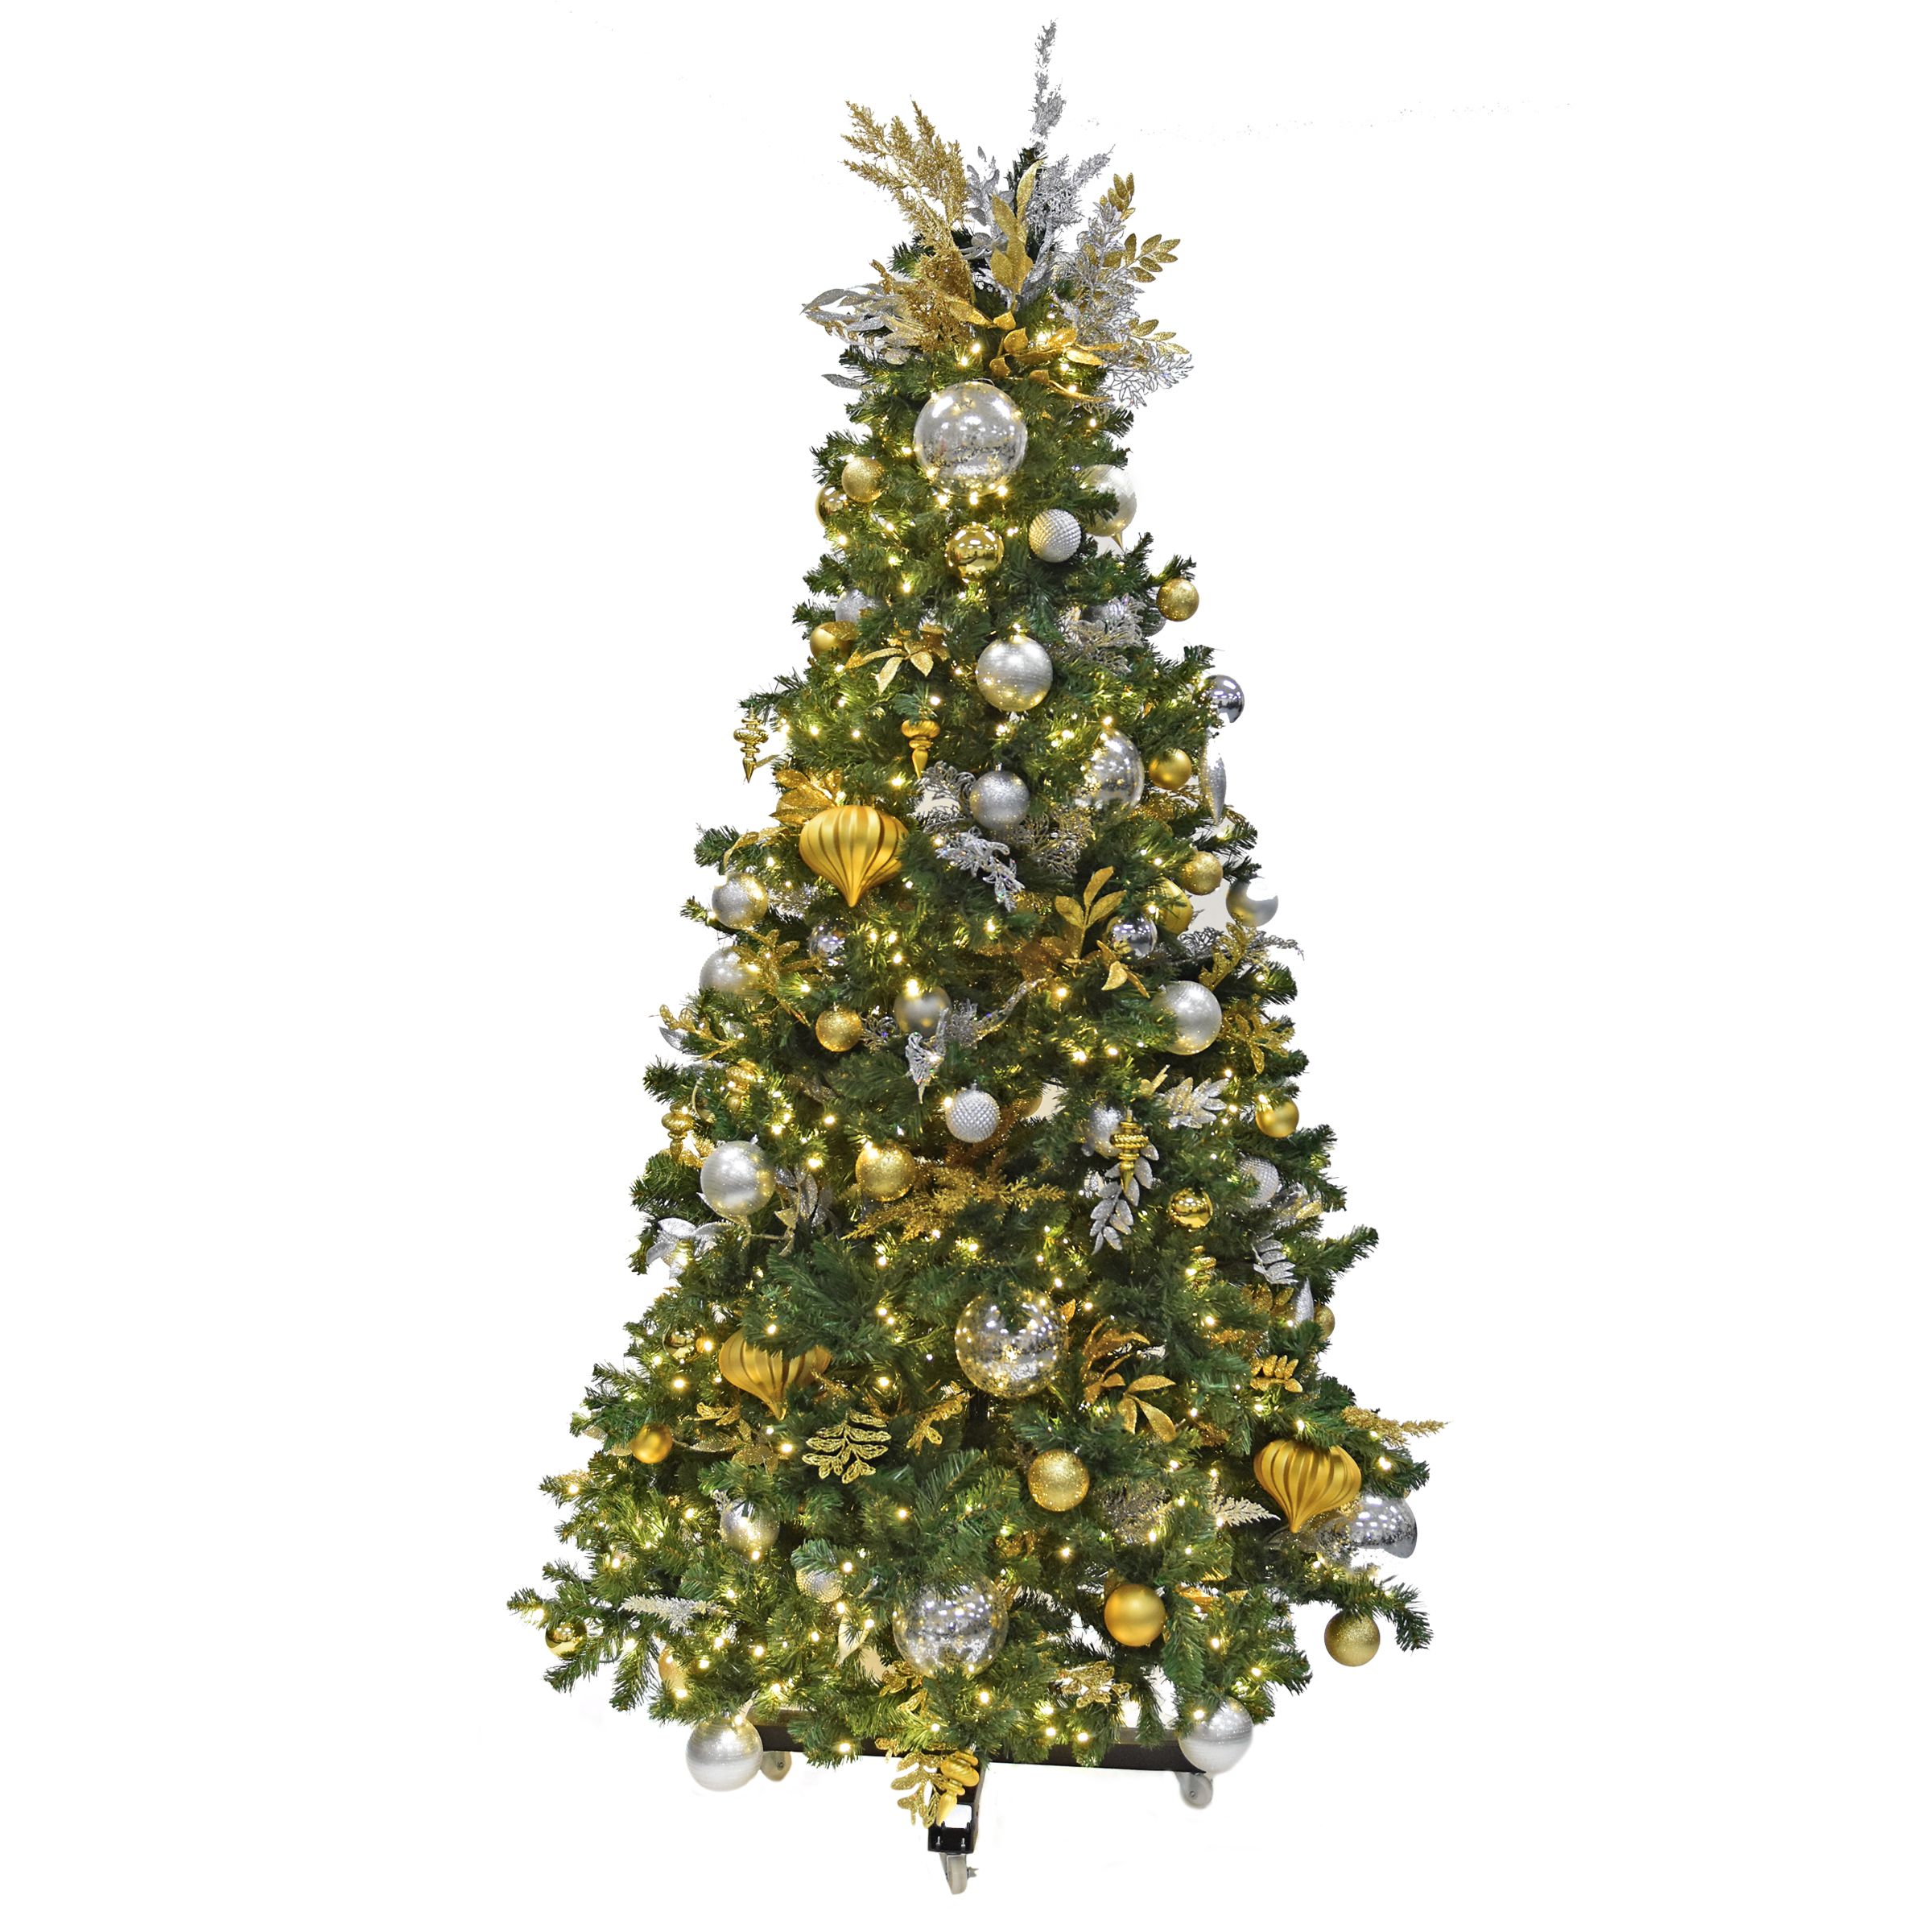 Tinsel Treasures - A gold and silver Christmas tree, lights on